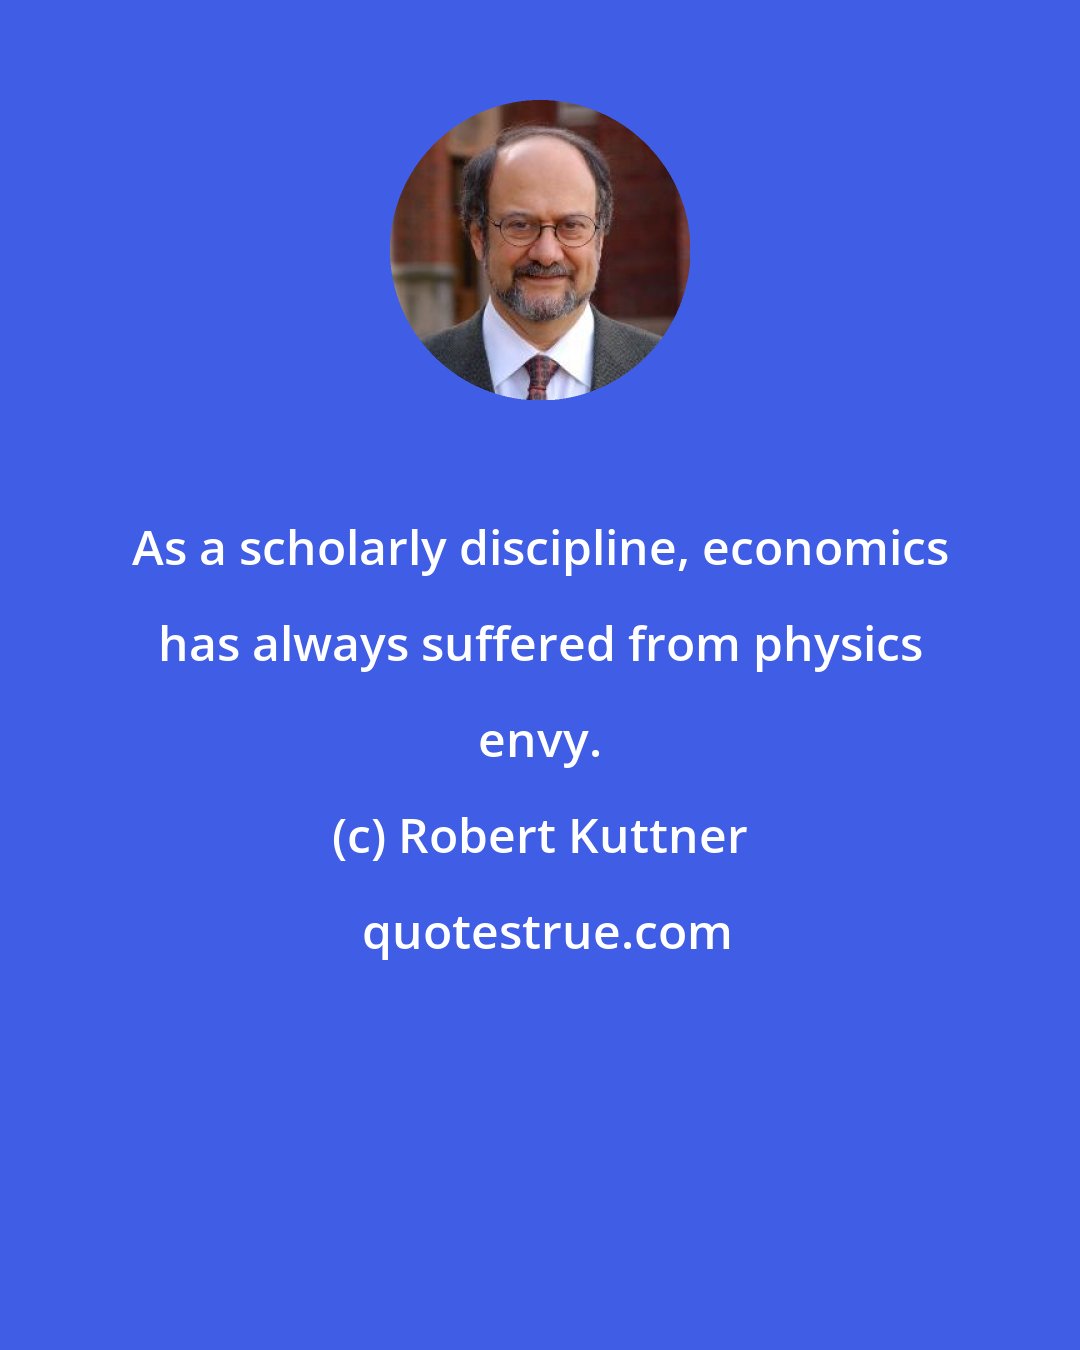 Robert Kuttner: As a scholarly discipline, economics has always suffered from physics envy.